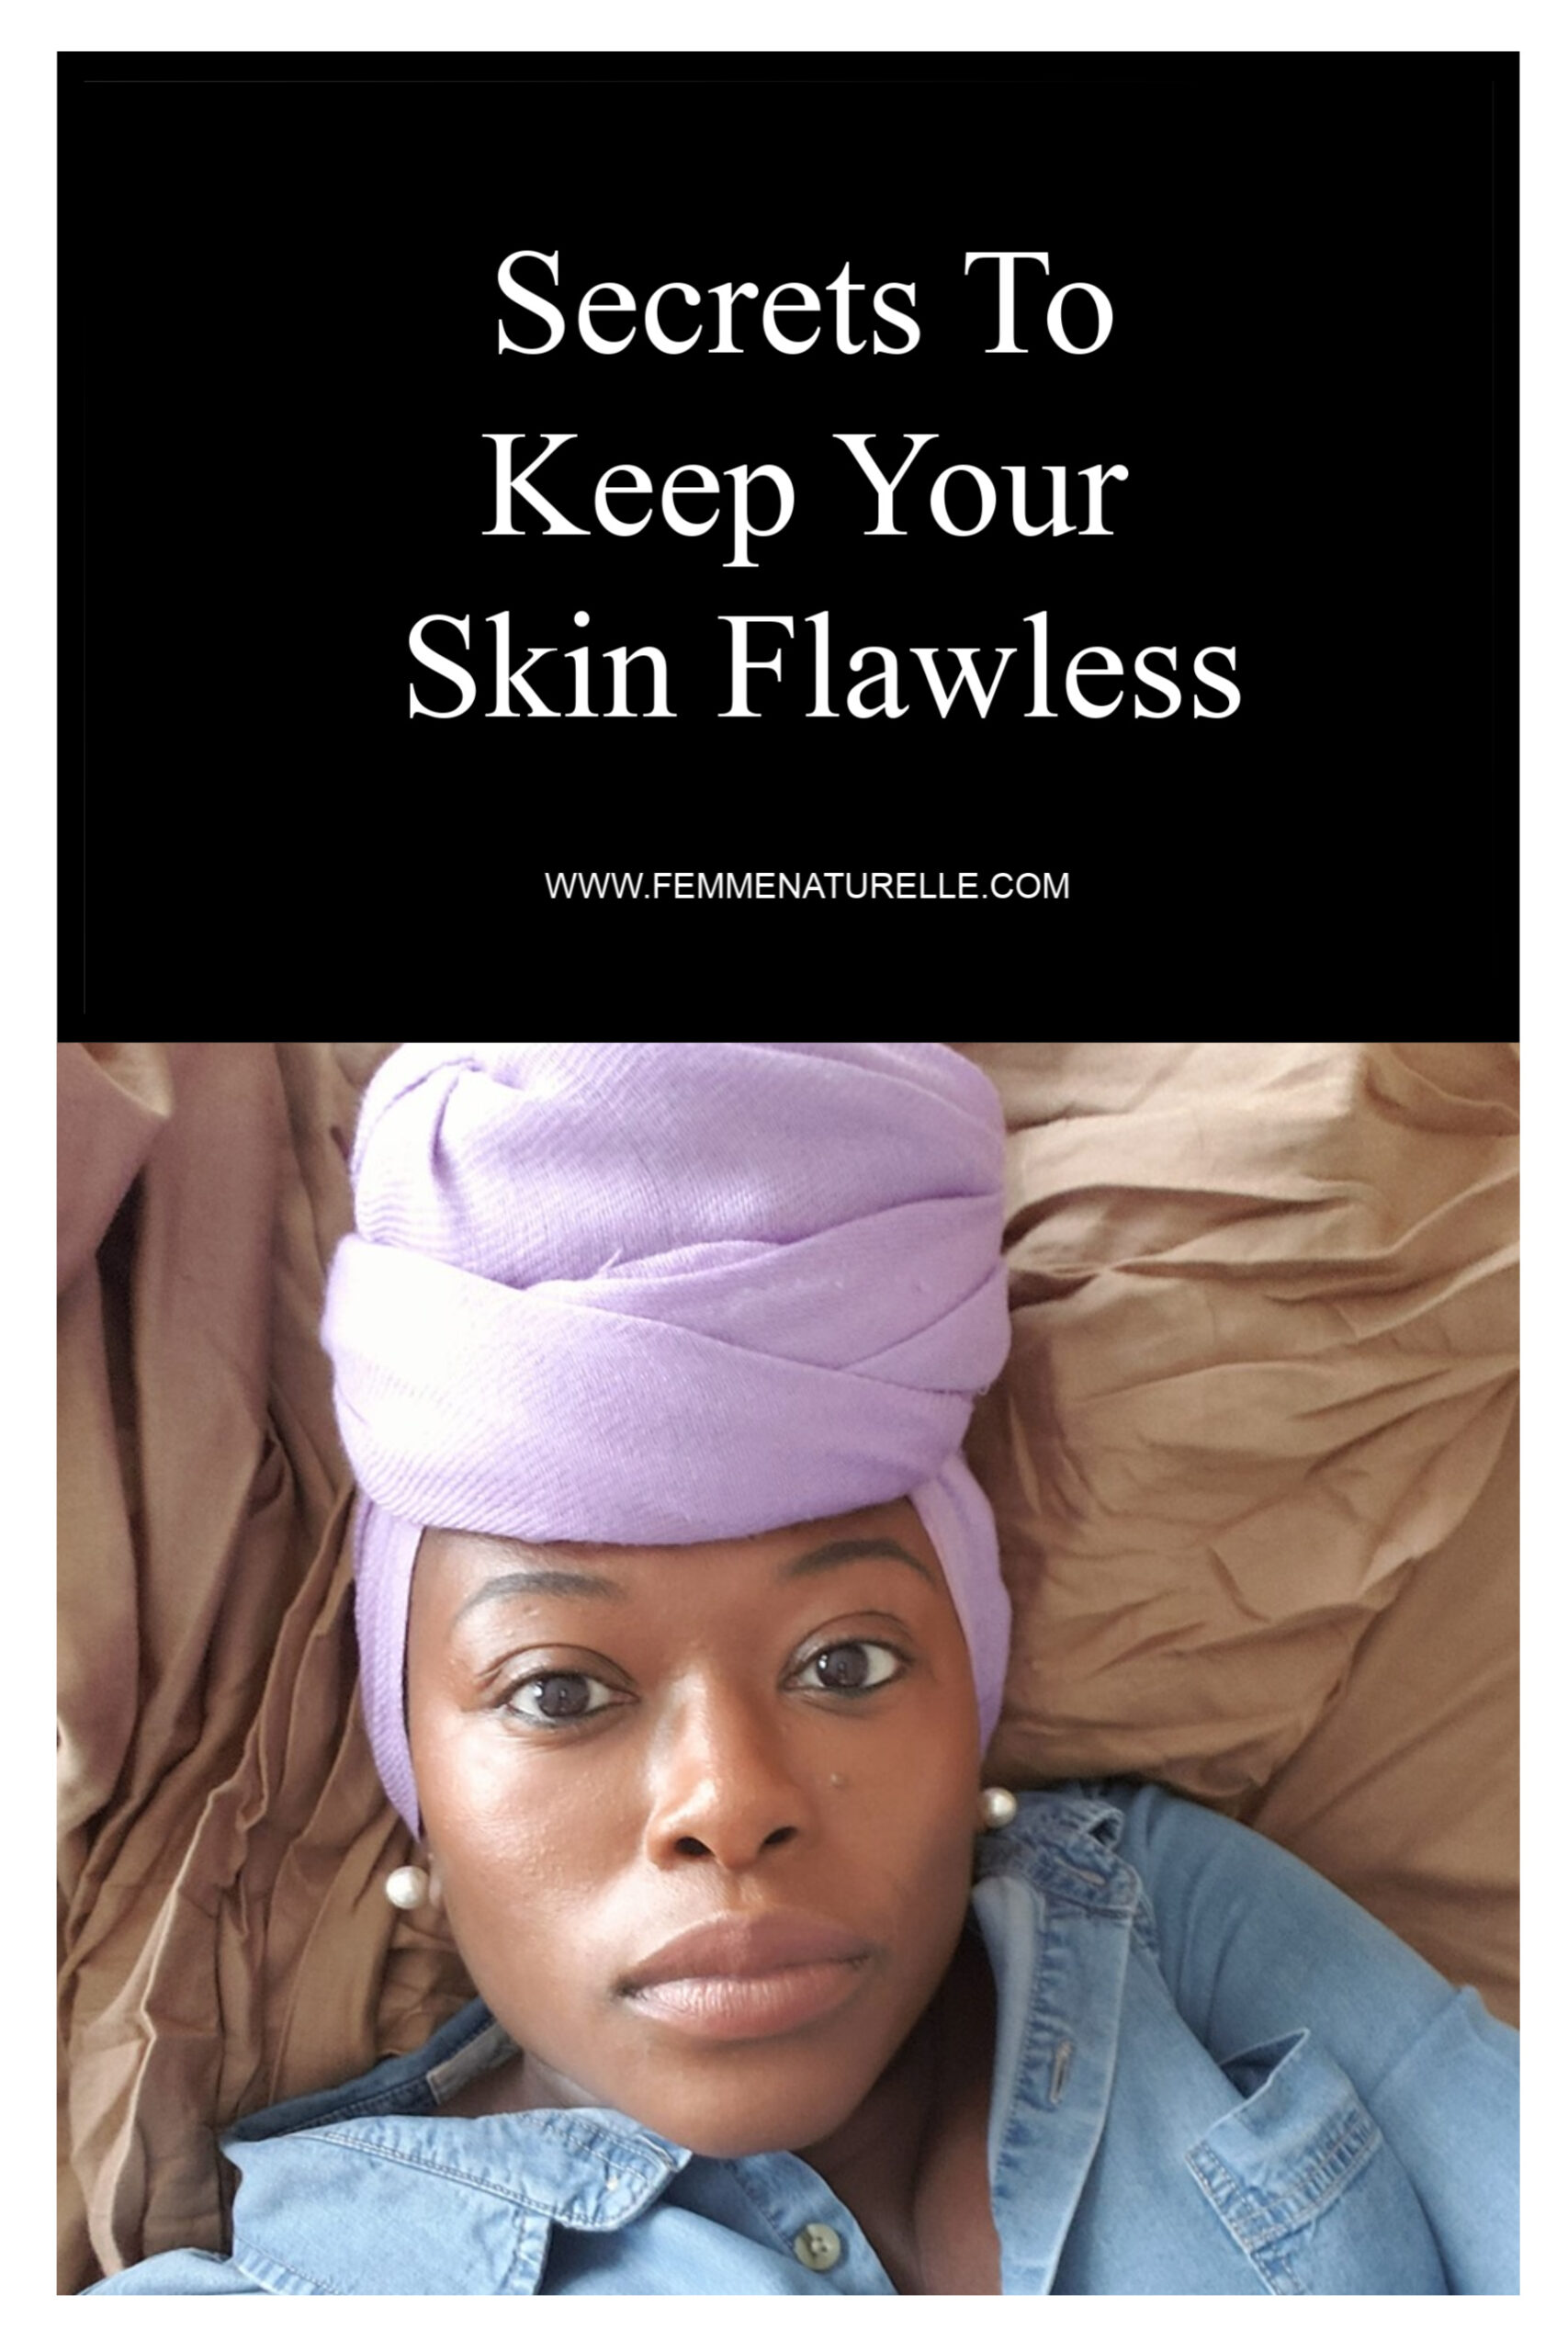 Secrets To Keep Your Skin Flawless